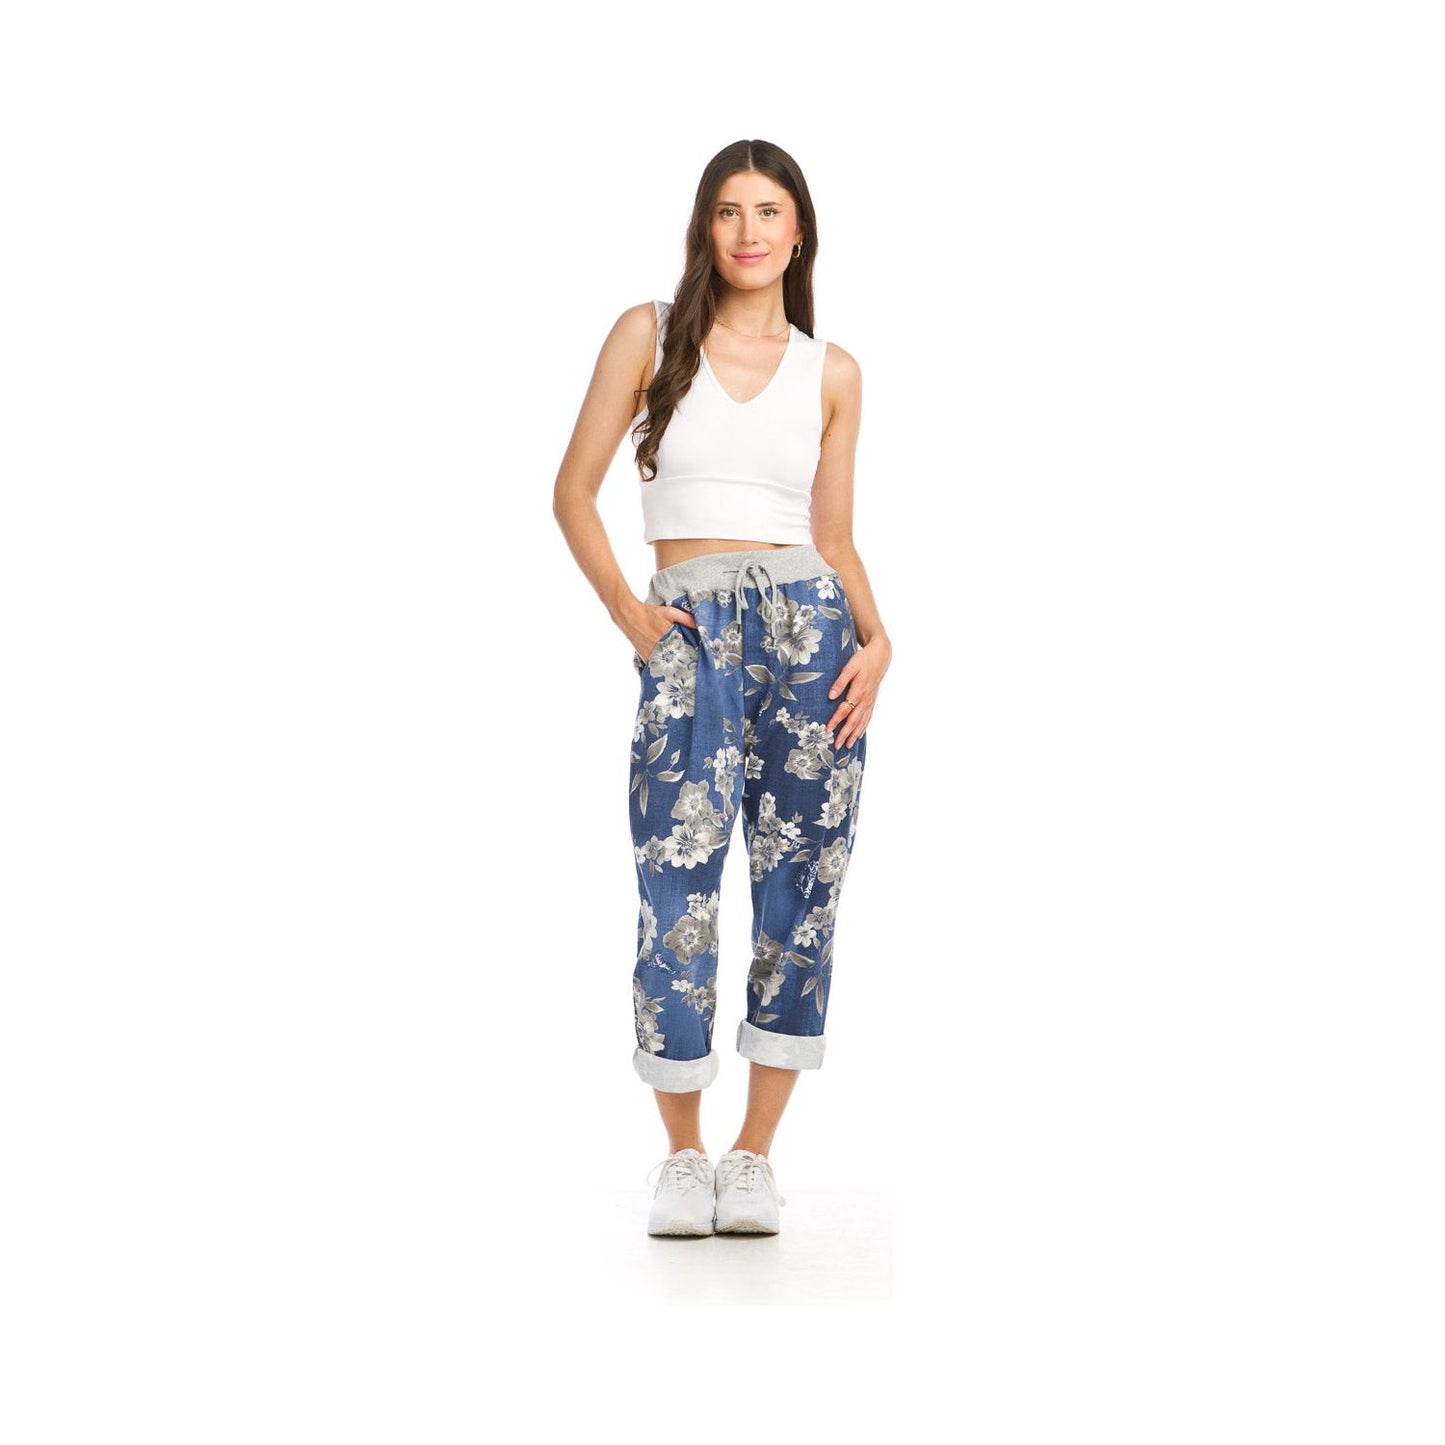 Floral Stretch Cotton Pant - Blue with White Flowers